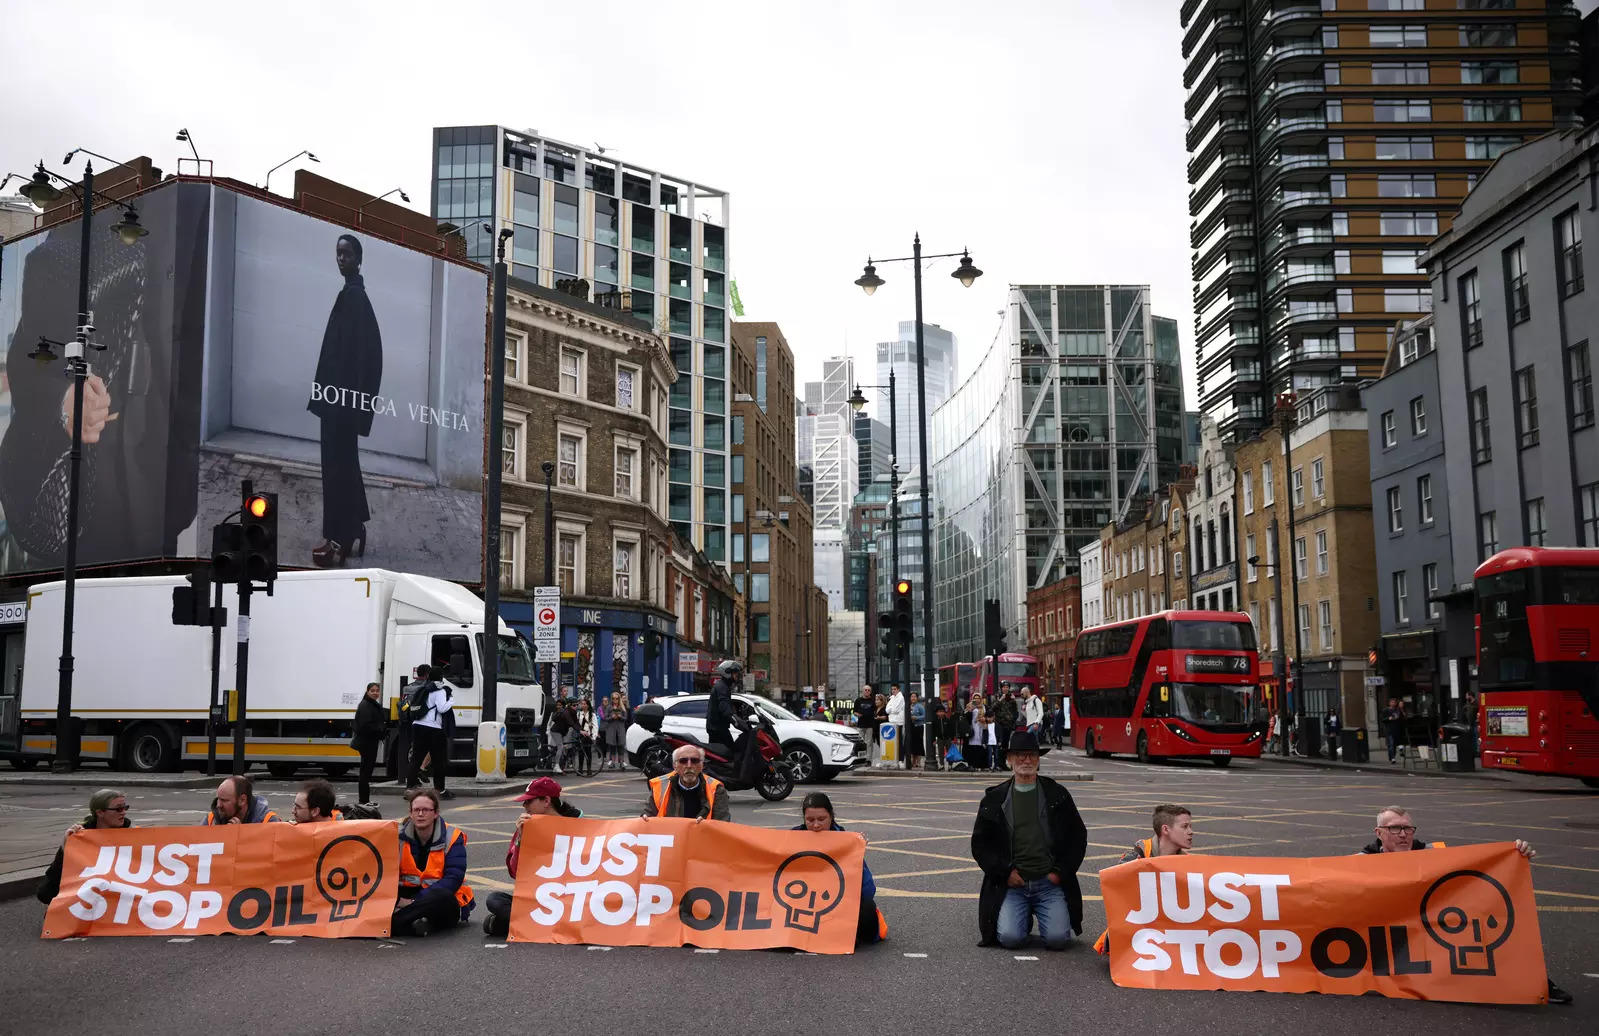 Activists block a road during a "Just Stop Oil" protest, in London, Britain, October 15, 2022. (Reuters)